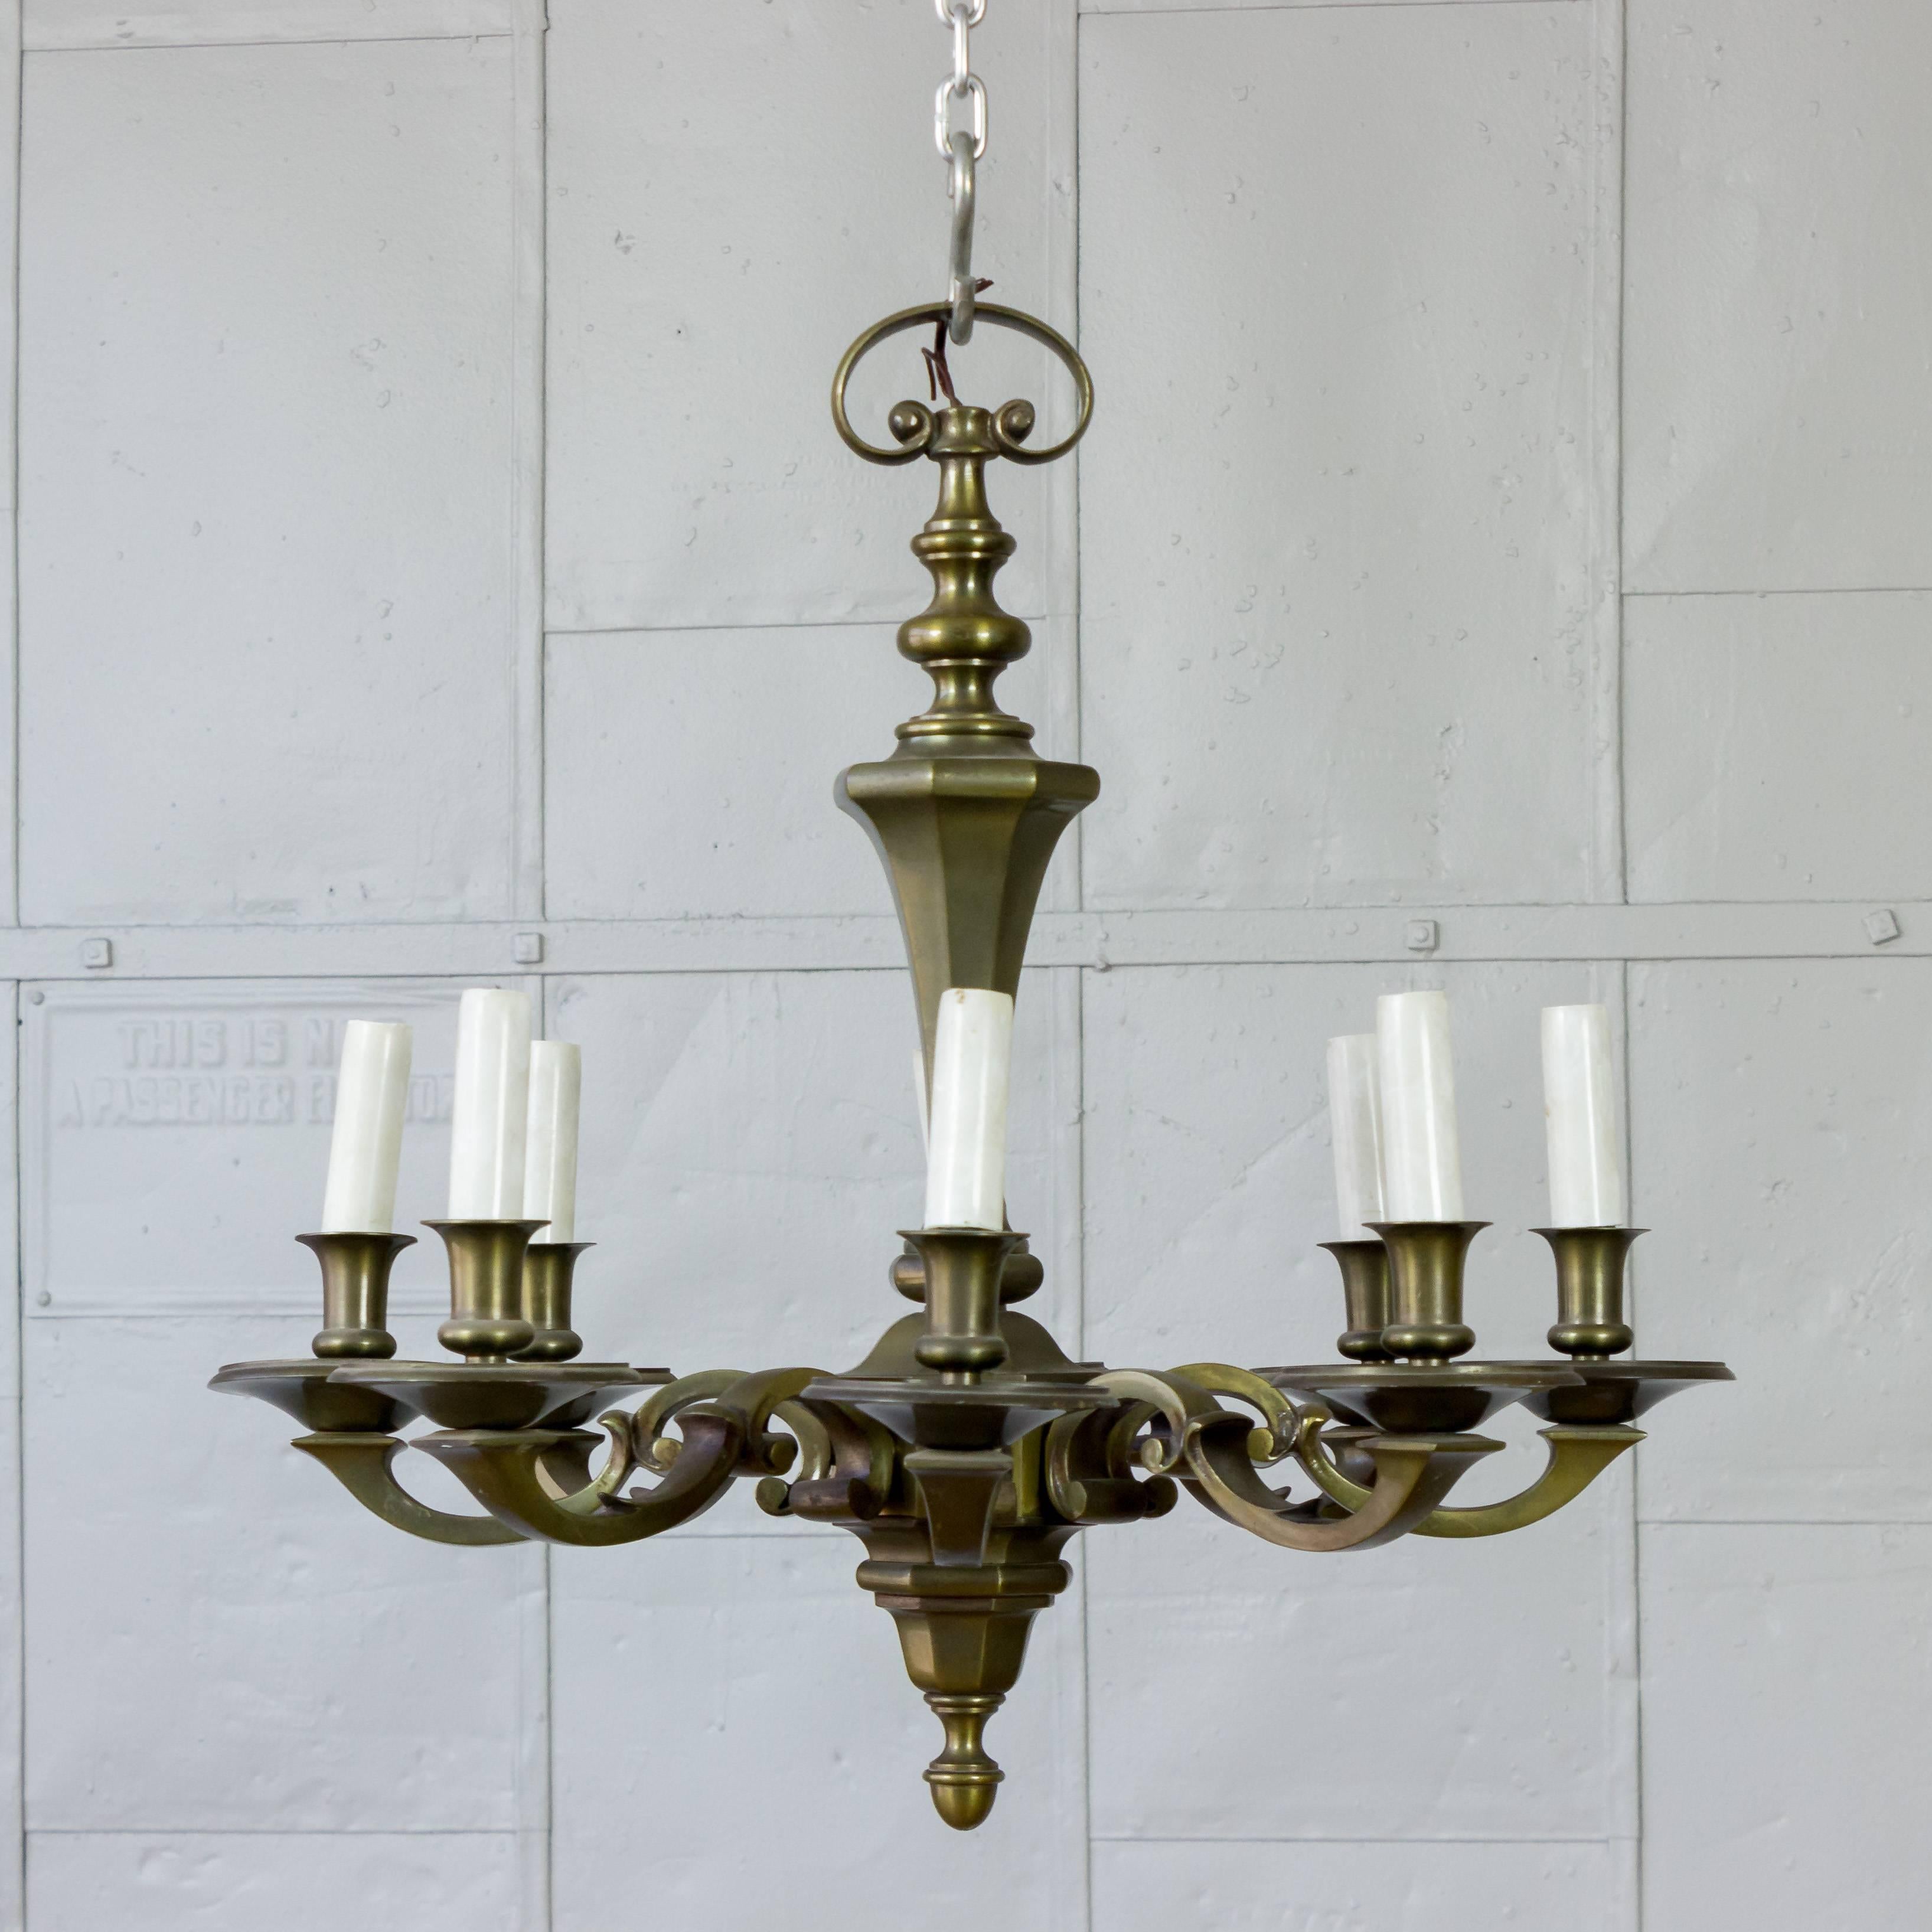 Eight arm bronze chandelier in very good condition. French, 1940s. Price includes new wiring.